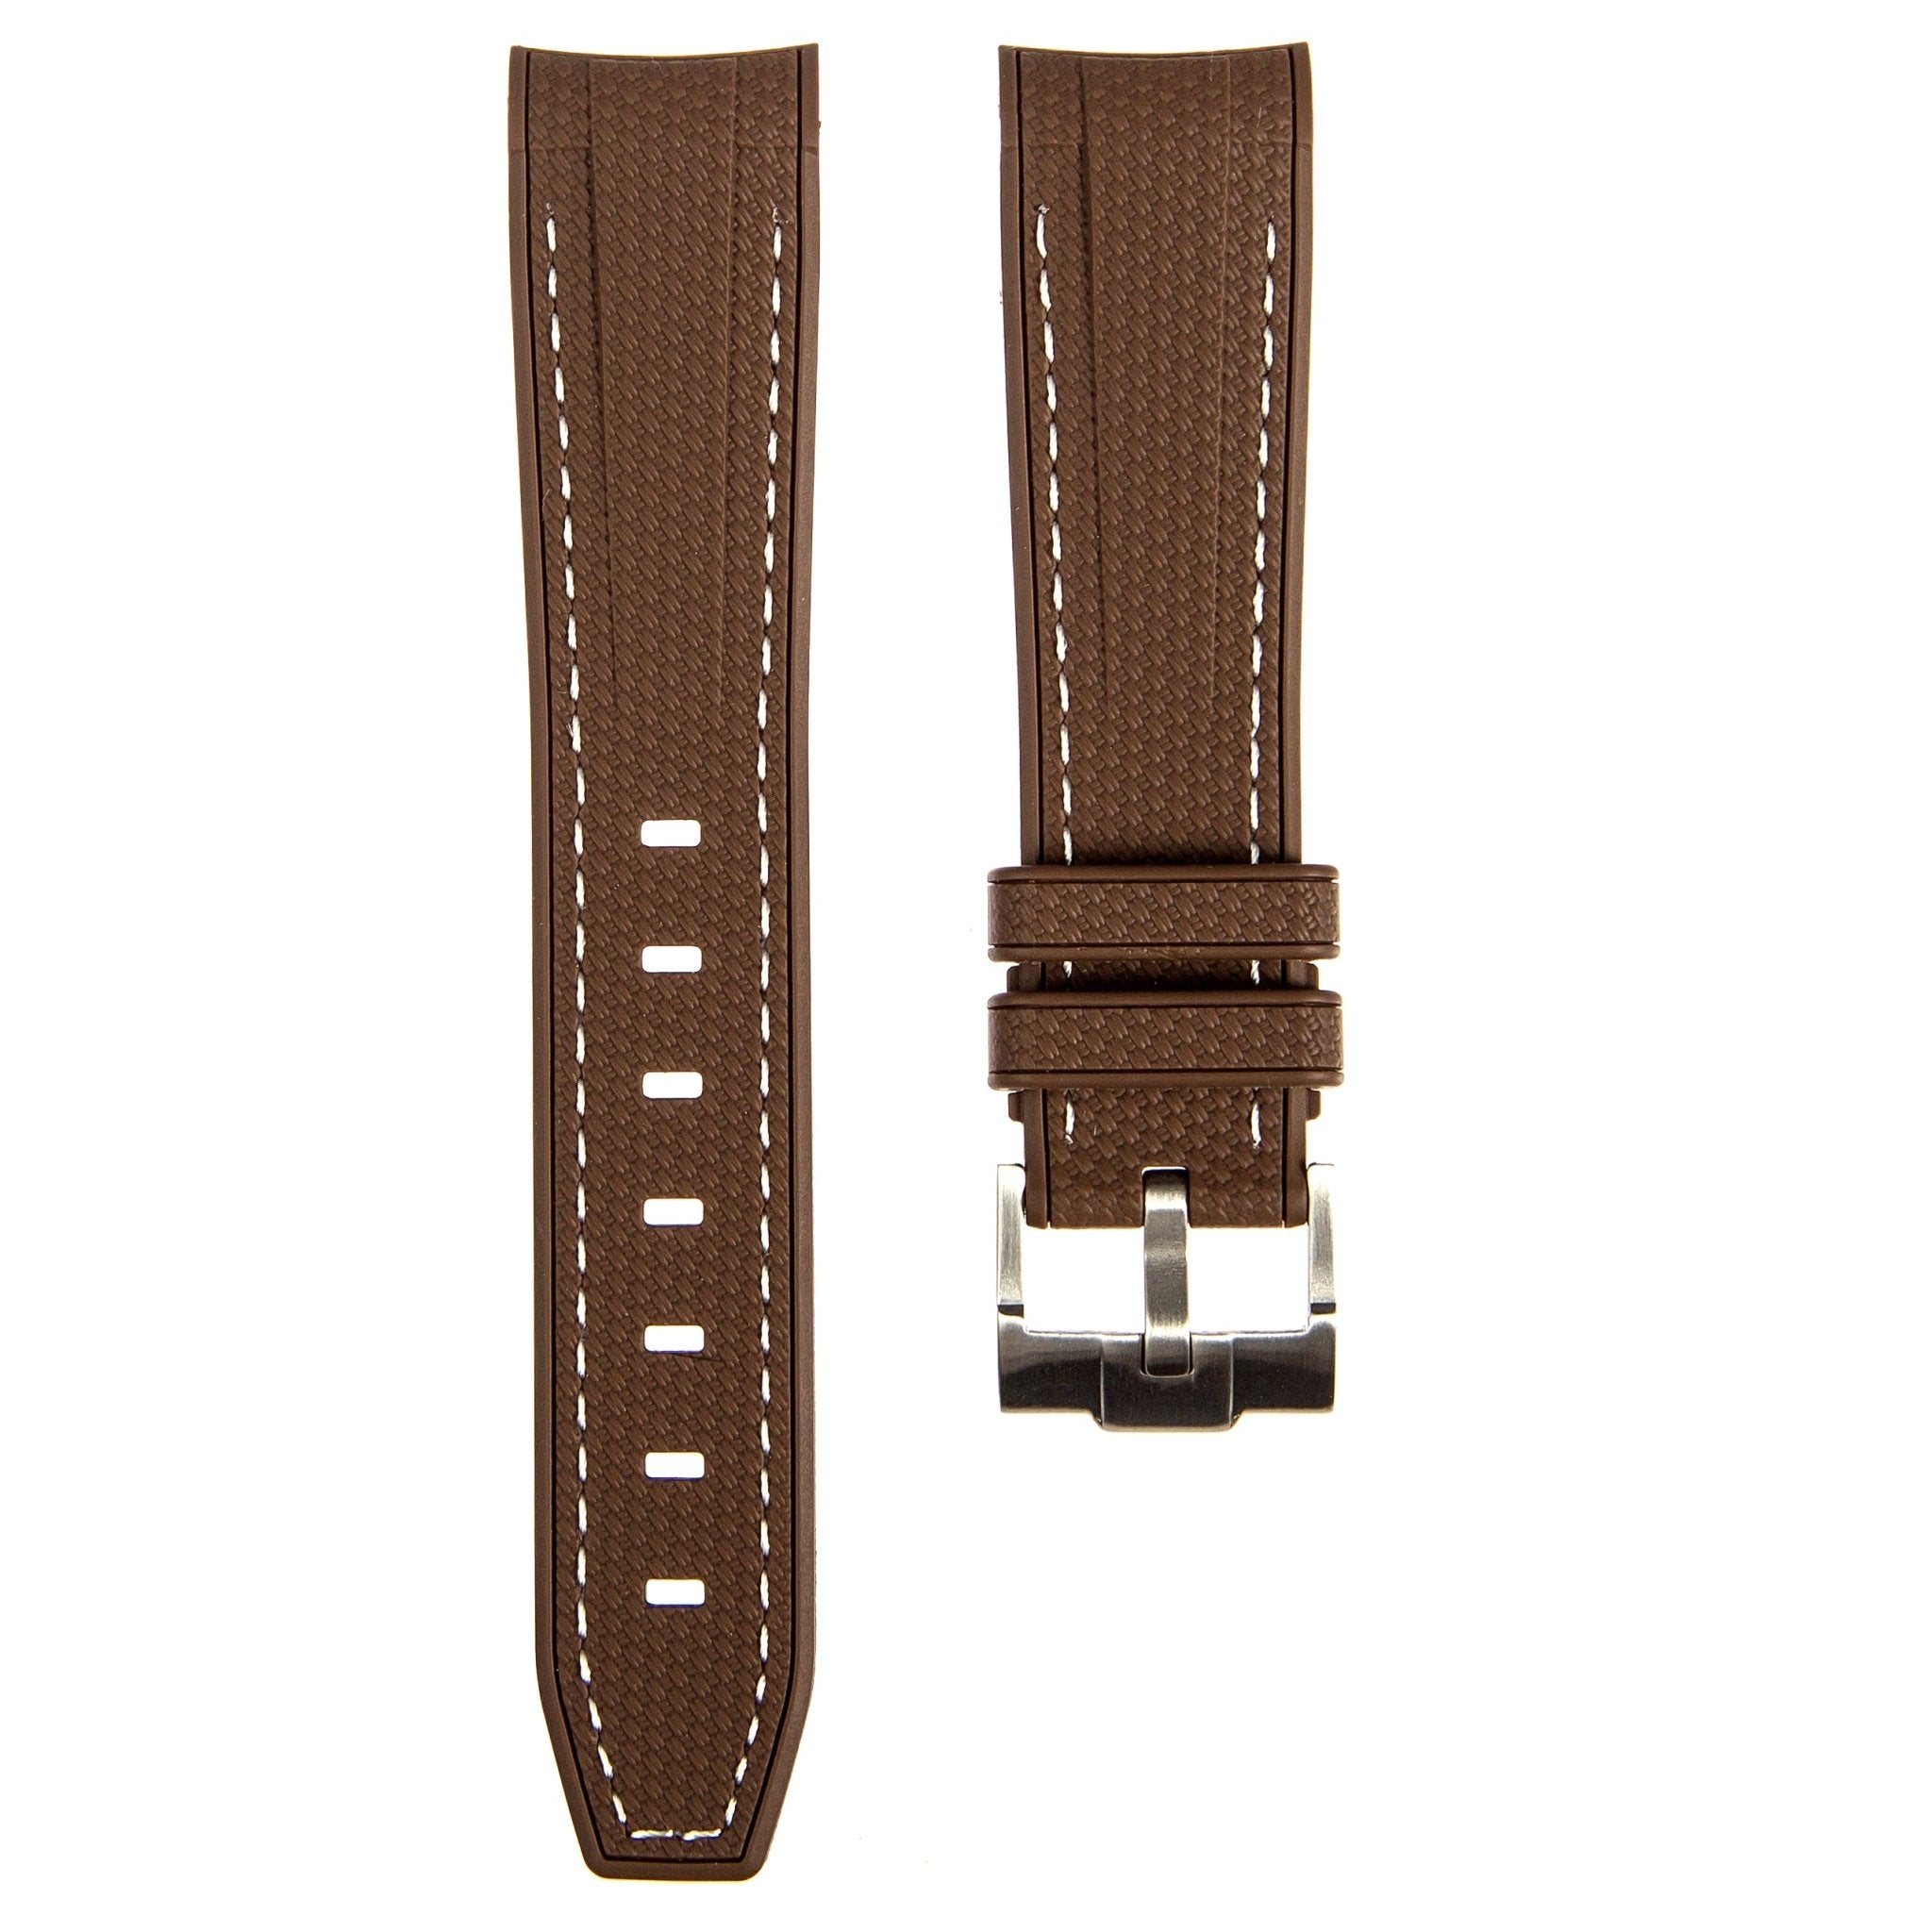 Textured Curved End Premium Silicone Strap - Brown with White Stitch (2405) -StrapSeeker